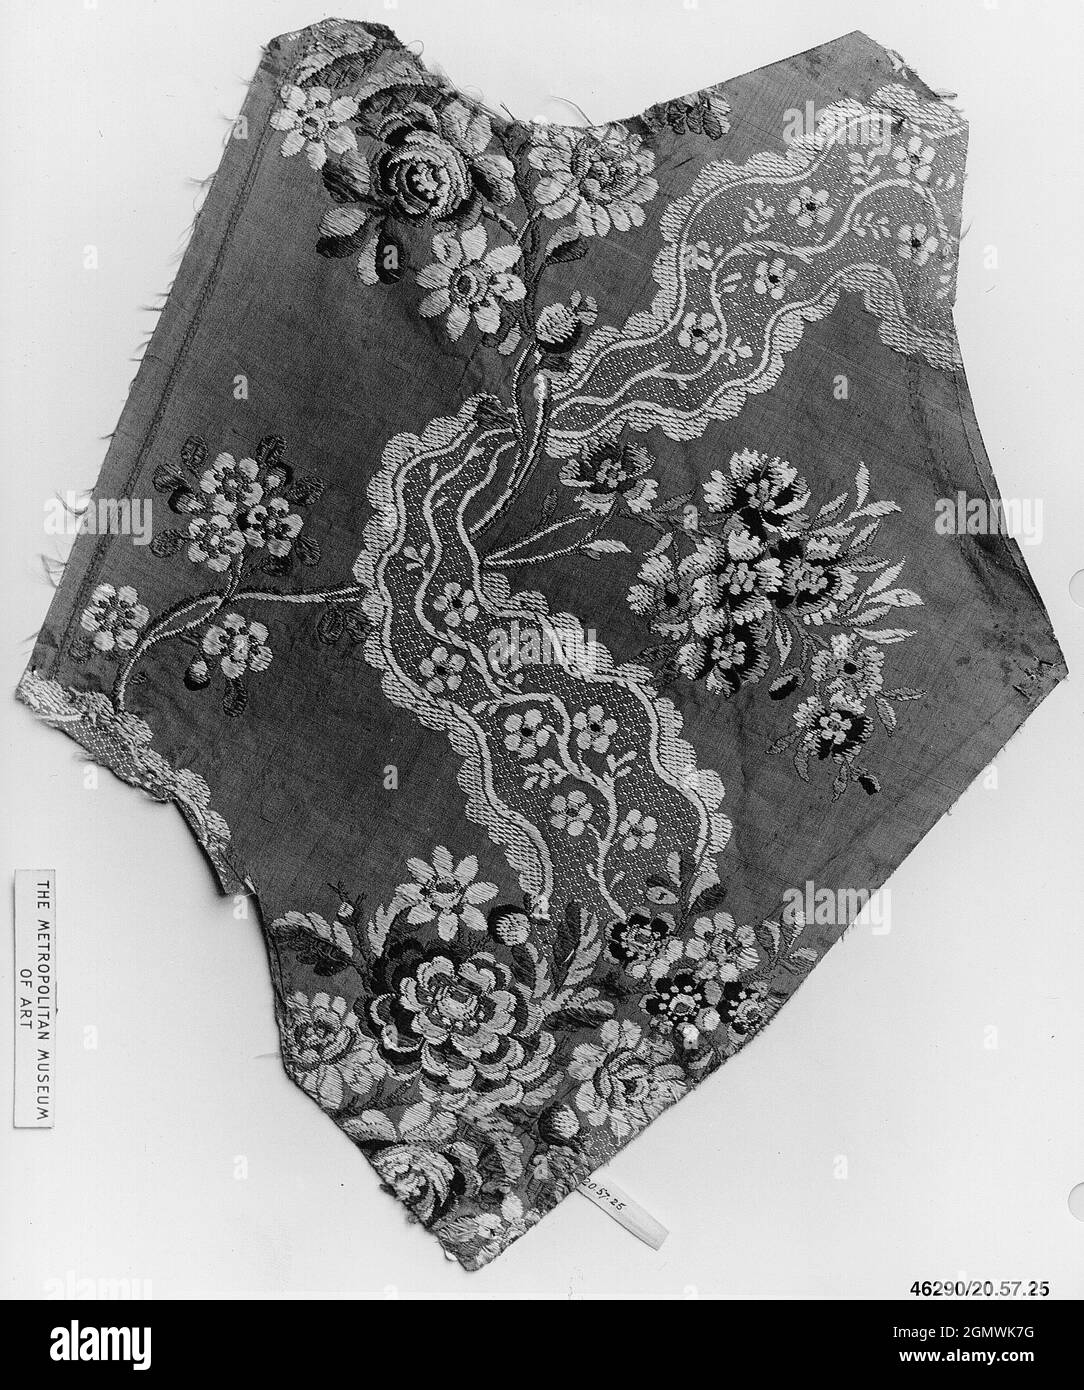 Piece. Date: 1760-65; Culture: French; Medium: Silk; Dimensions: 10 1/4 x 14 inches (26.0 x 35.6 cm); Classification: Textiles-Woven Stock Photo